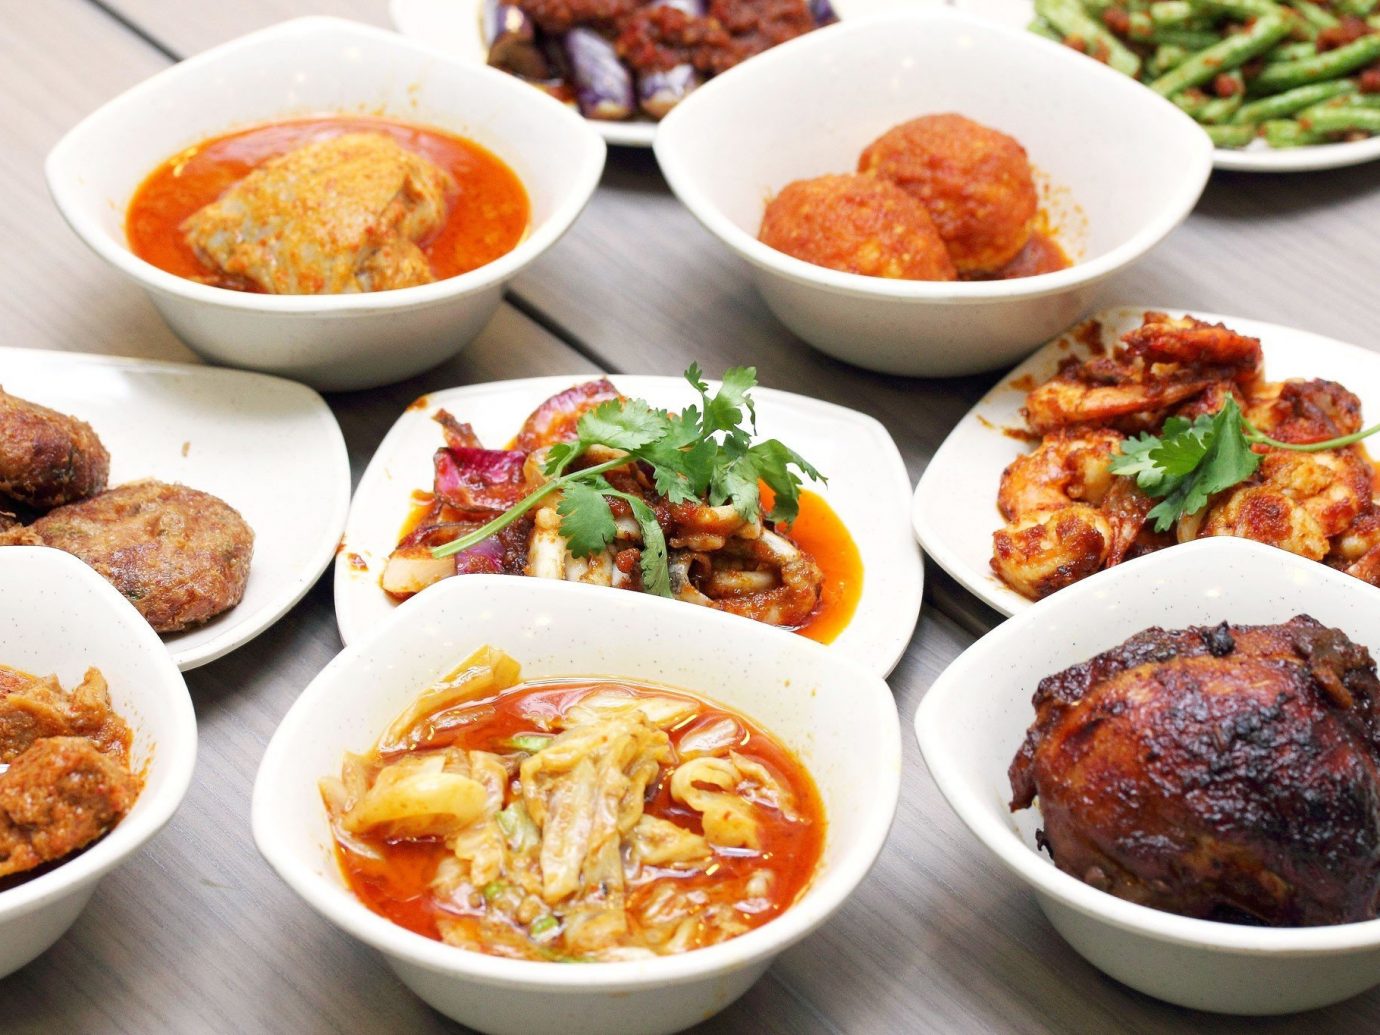 Food + Drink food plate table bowl dish different cuisine meal asian food several many lunch banchan chinese food southeast asian food side dish meat vegetable various containing